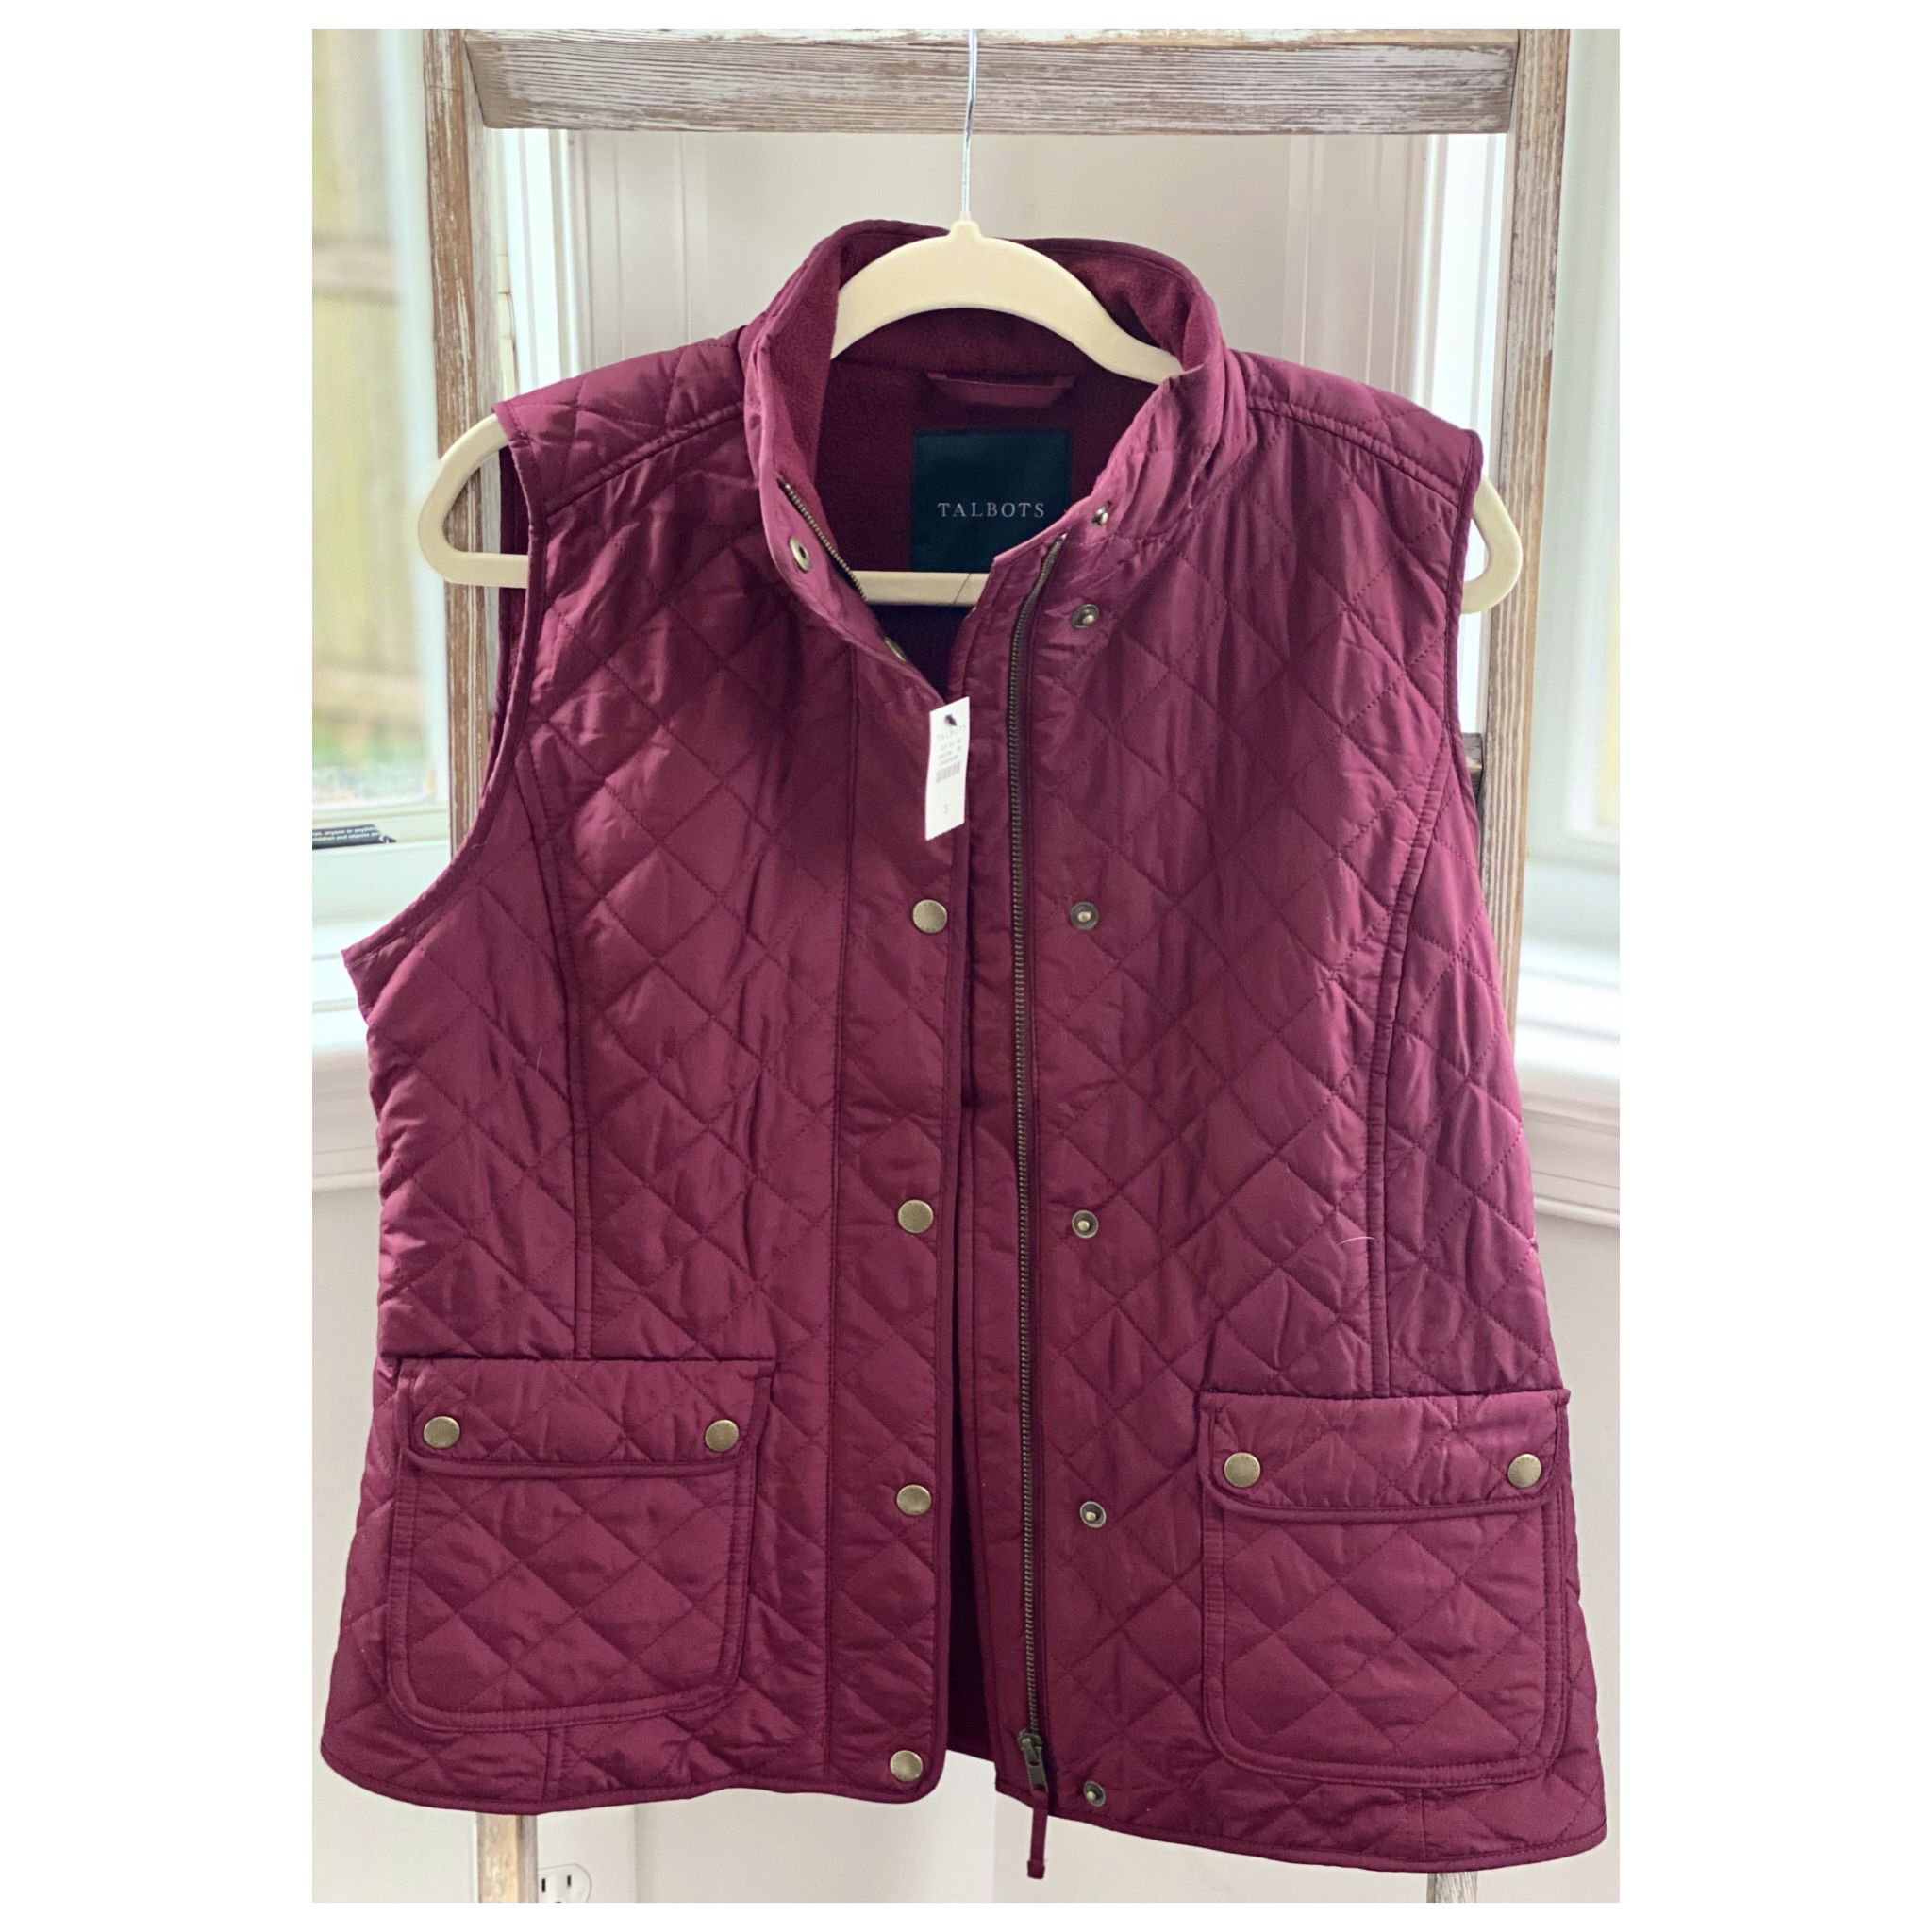 Talbots Quilted Vest Size Small